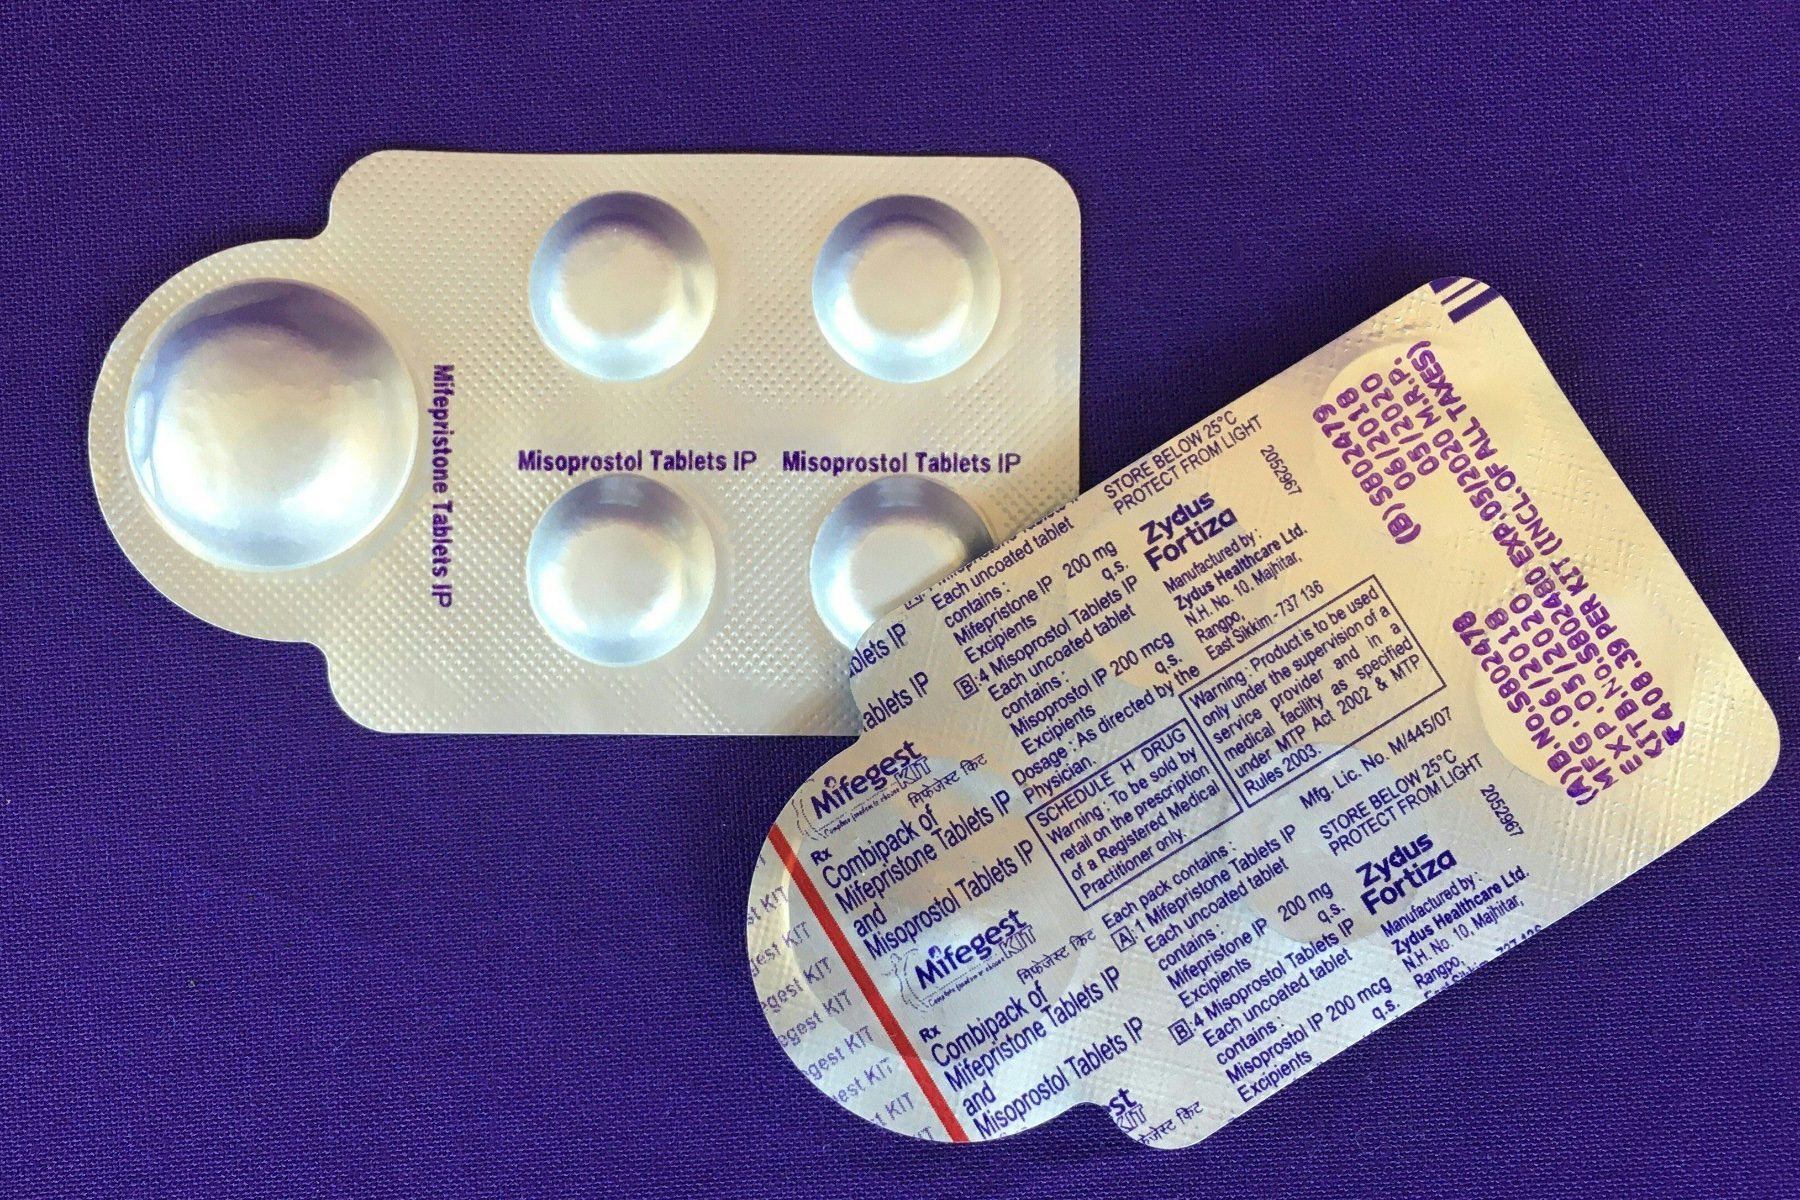 A combination pack of mifepristone and misoprostol, two medicines that are used in medication abortions.